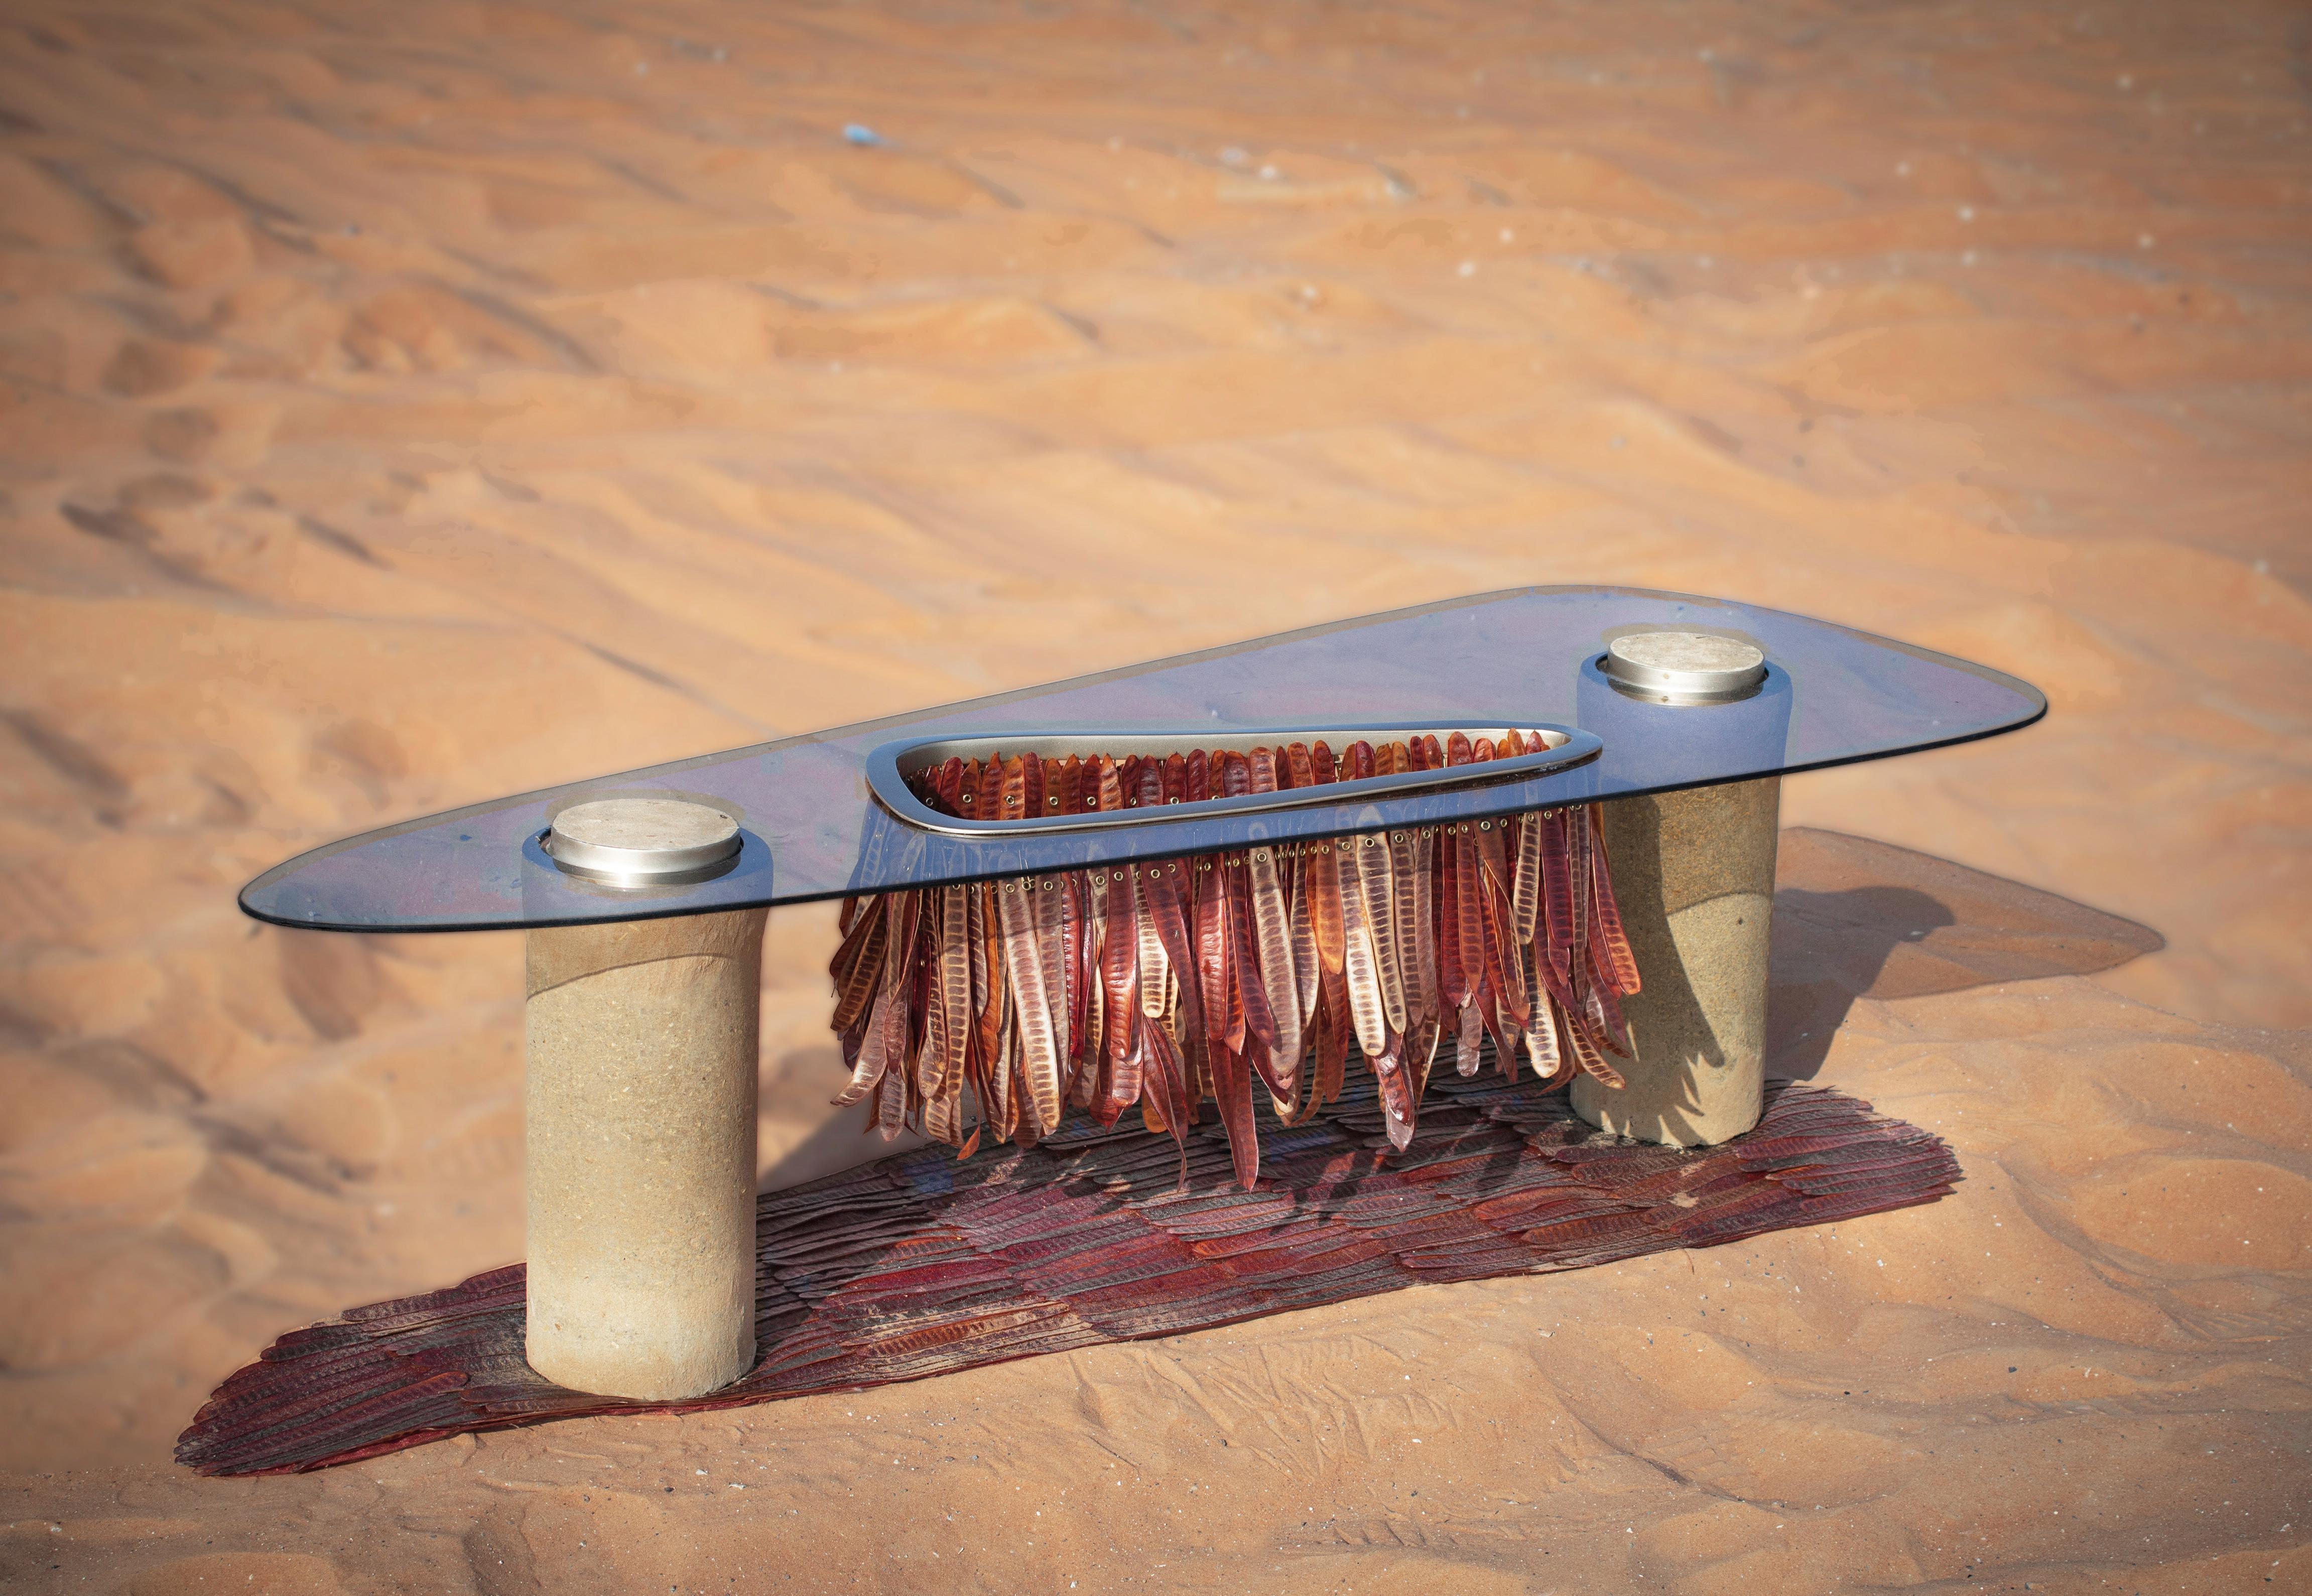 Seeds middle table by Nuhayr
Limited Edition Collection 
Dimensions: W 56 x L 154 x H 42cm
Materials: Lauceana, aluminium, steel, Belgian reflective glass-brown.
   